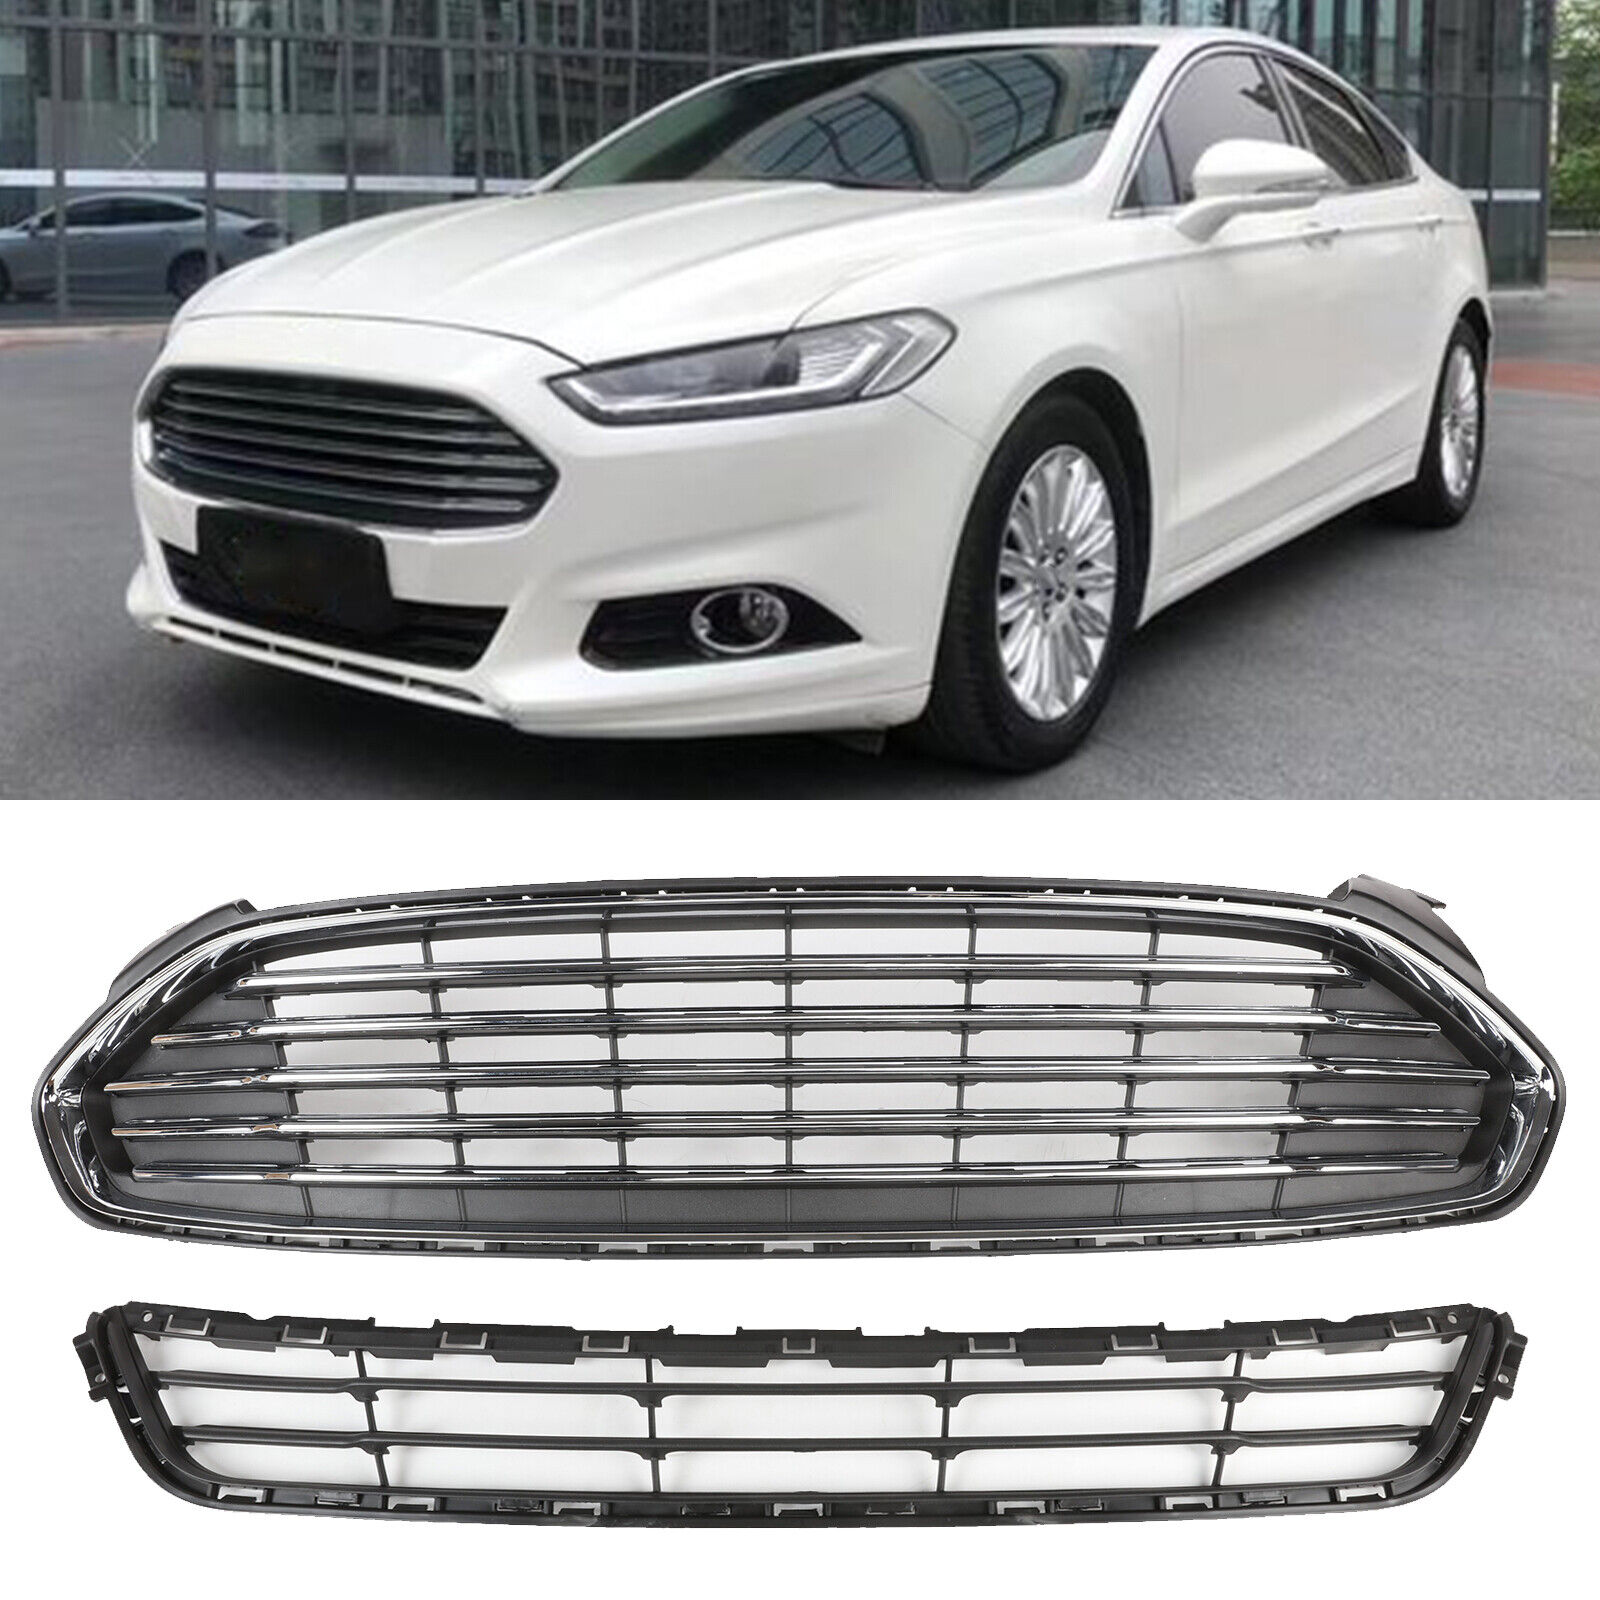 2Pcs Front Bumper Upper+Lower Grille Grill For Ford Fusion 2013-2016